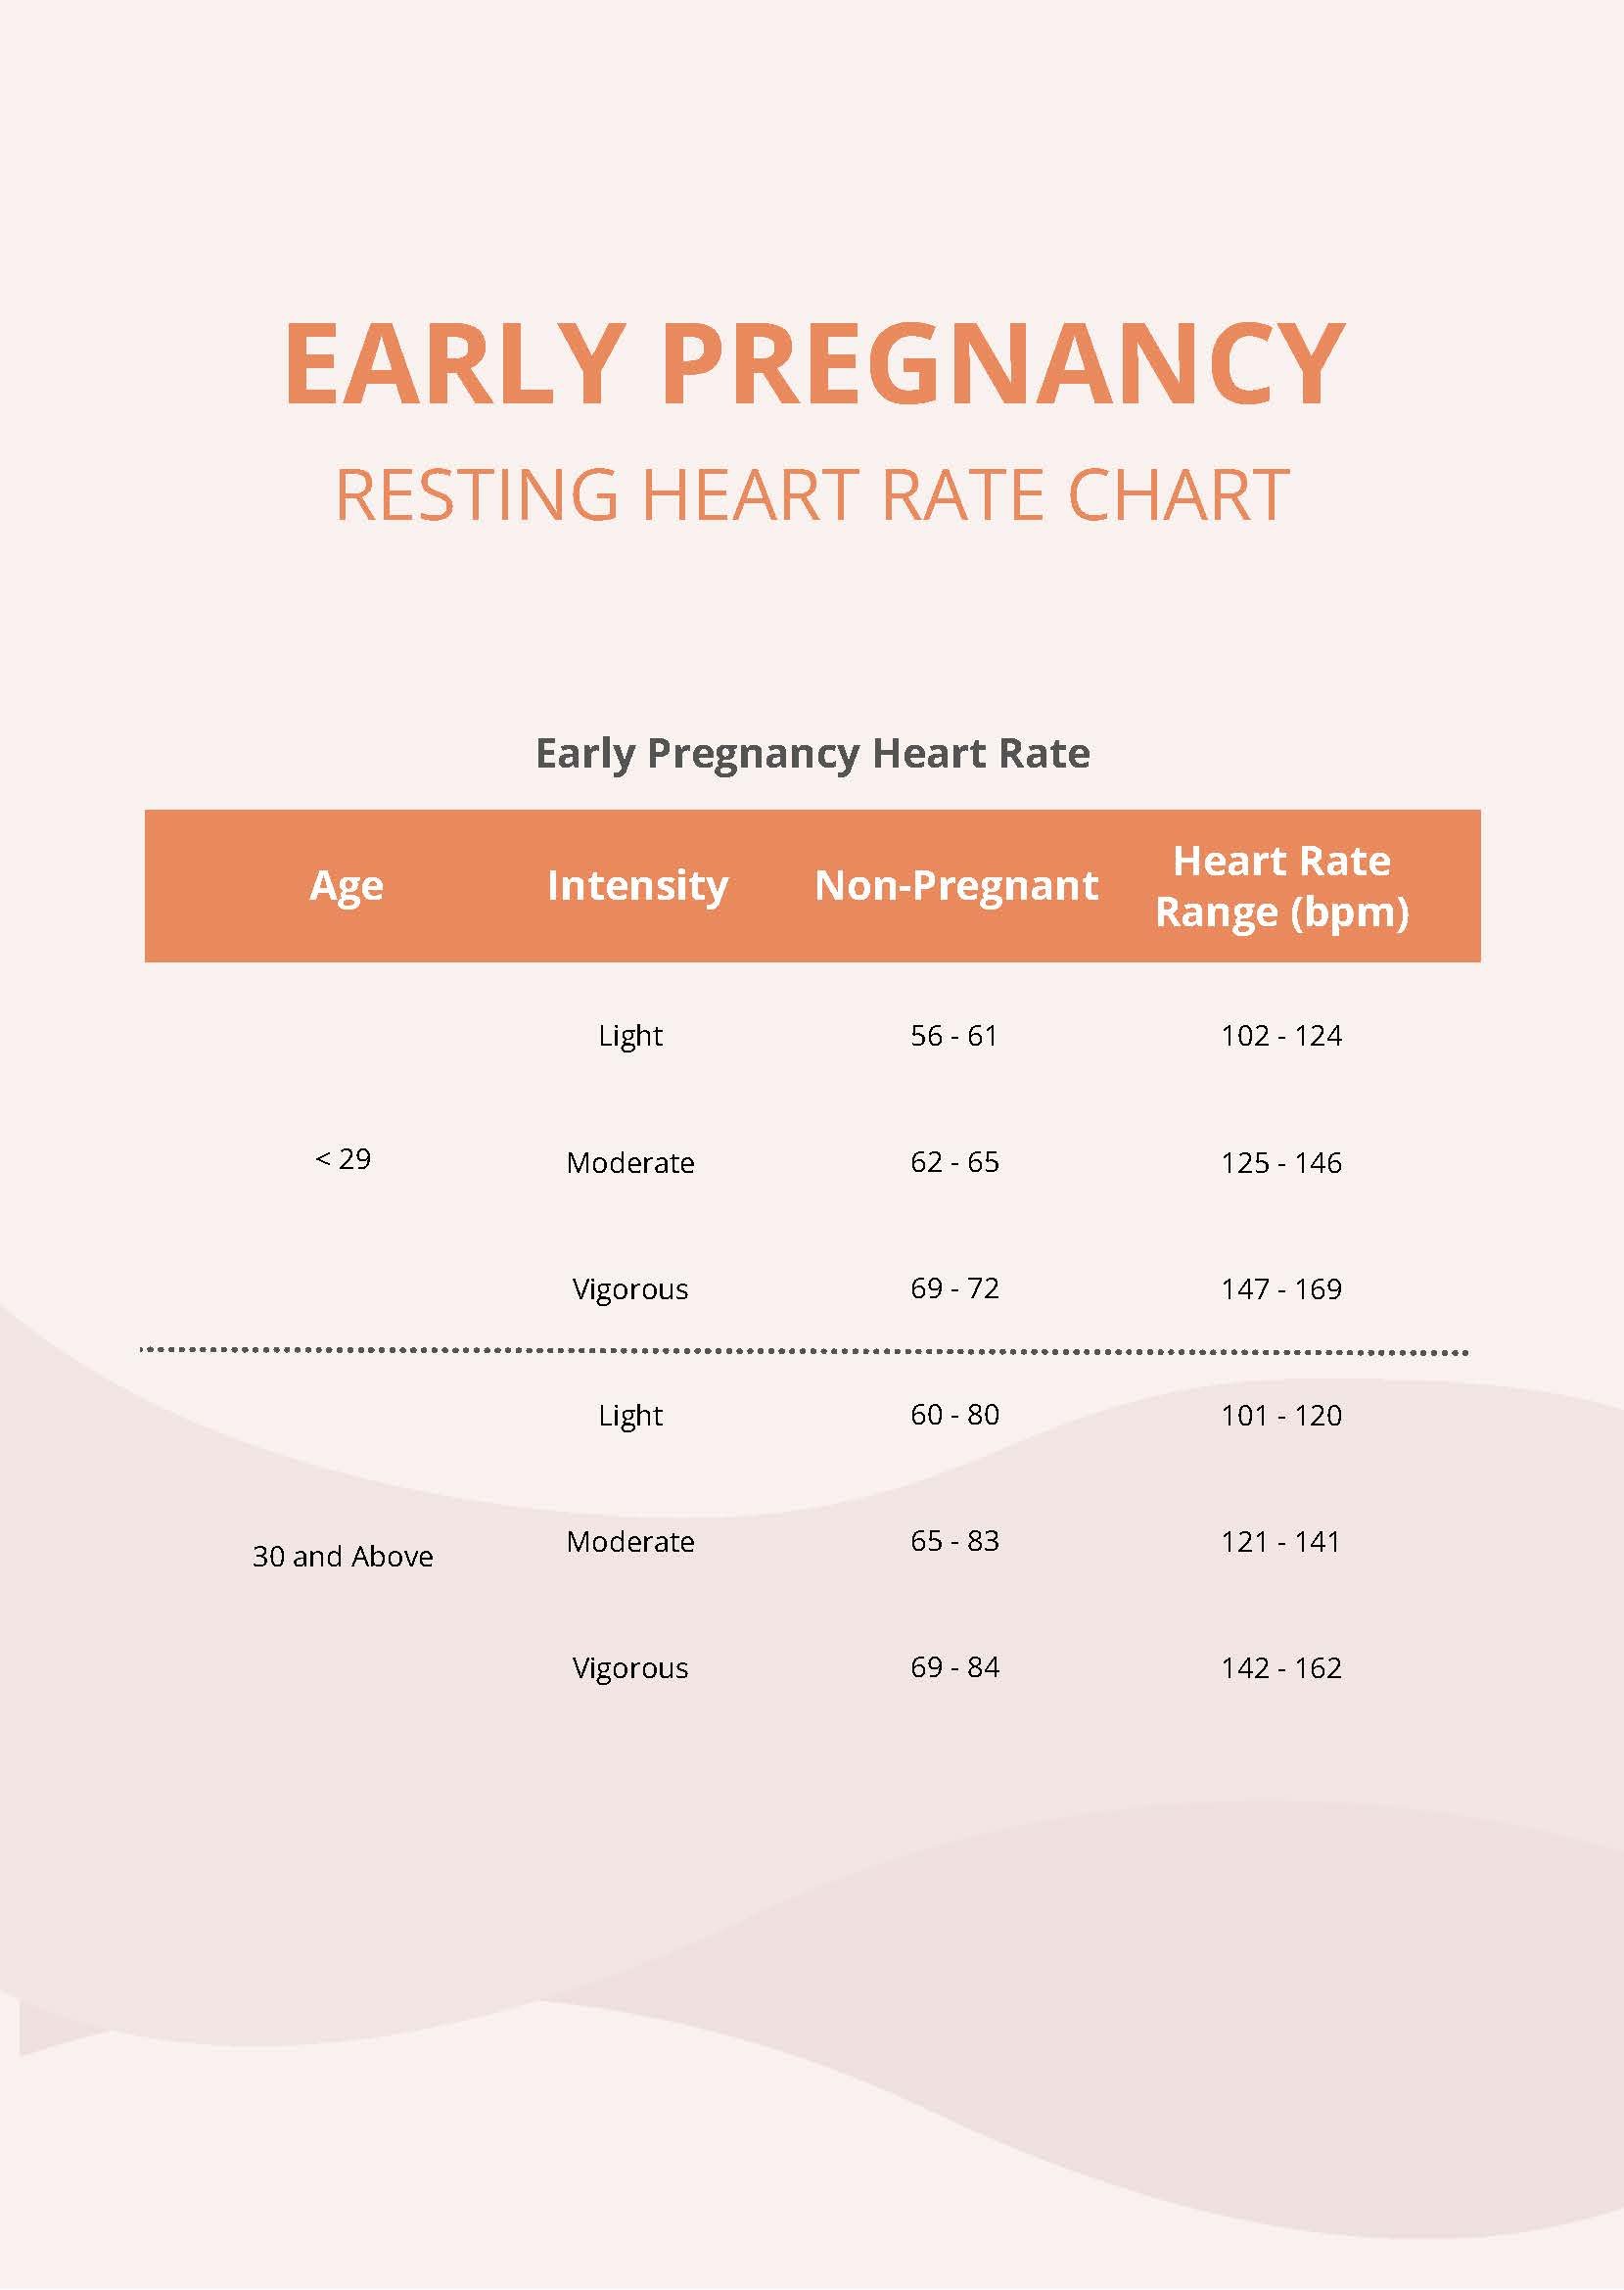 https://images.template.net/102338/early-pregnancy-resting-heart-rate-chart-9bh2y.jpg